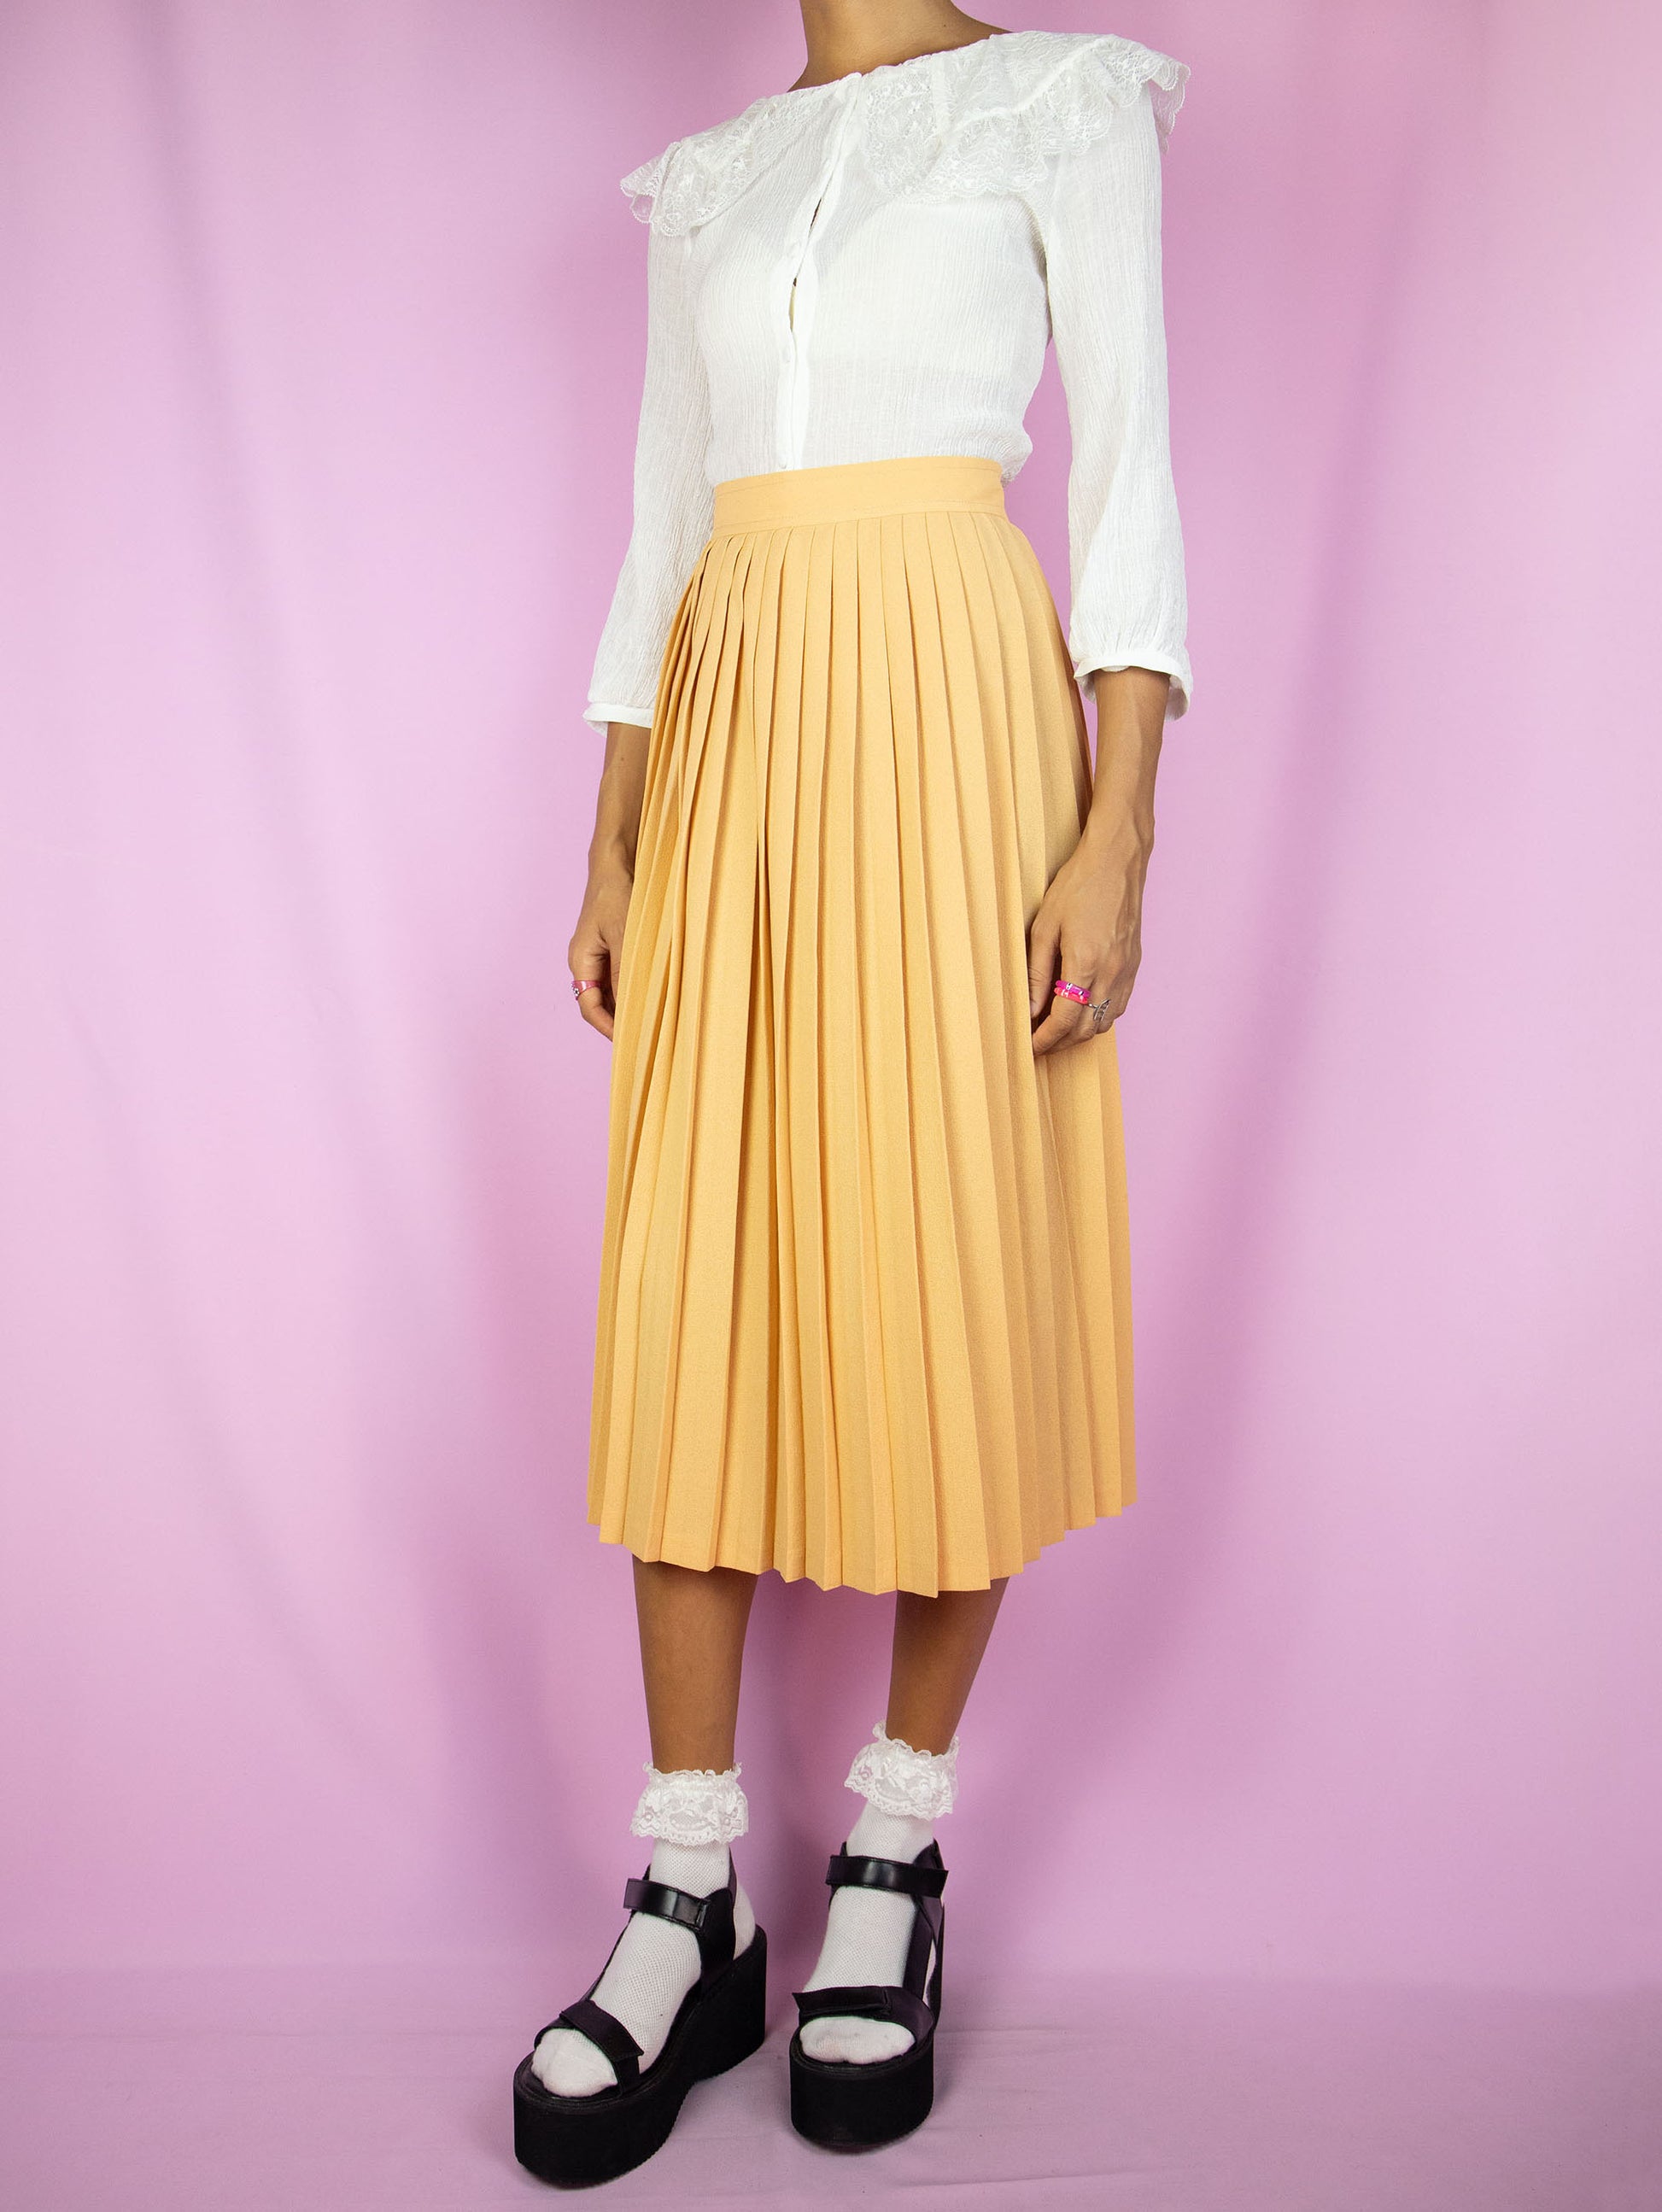 The Vintage 80s Orange Pleated Midi Skirt is a pastel light orange skirt with a back zipper closure. Classic preppy 1980s skirt.